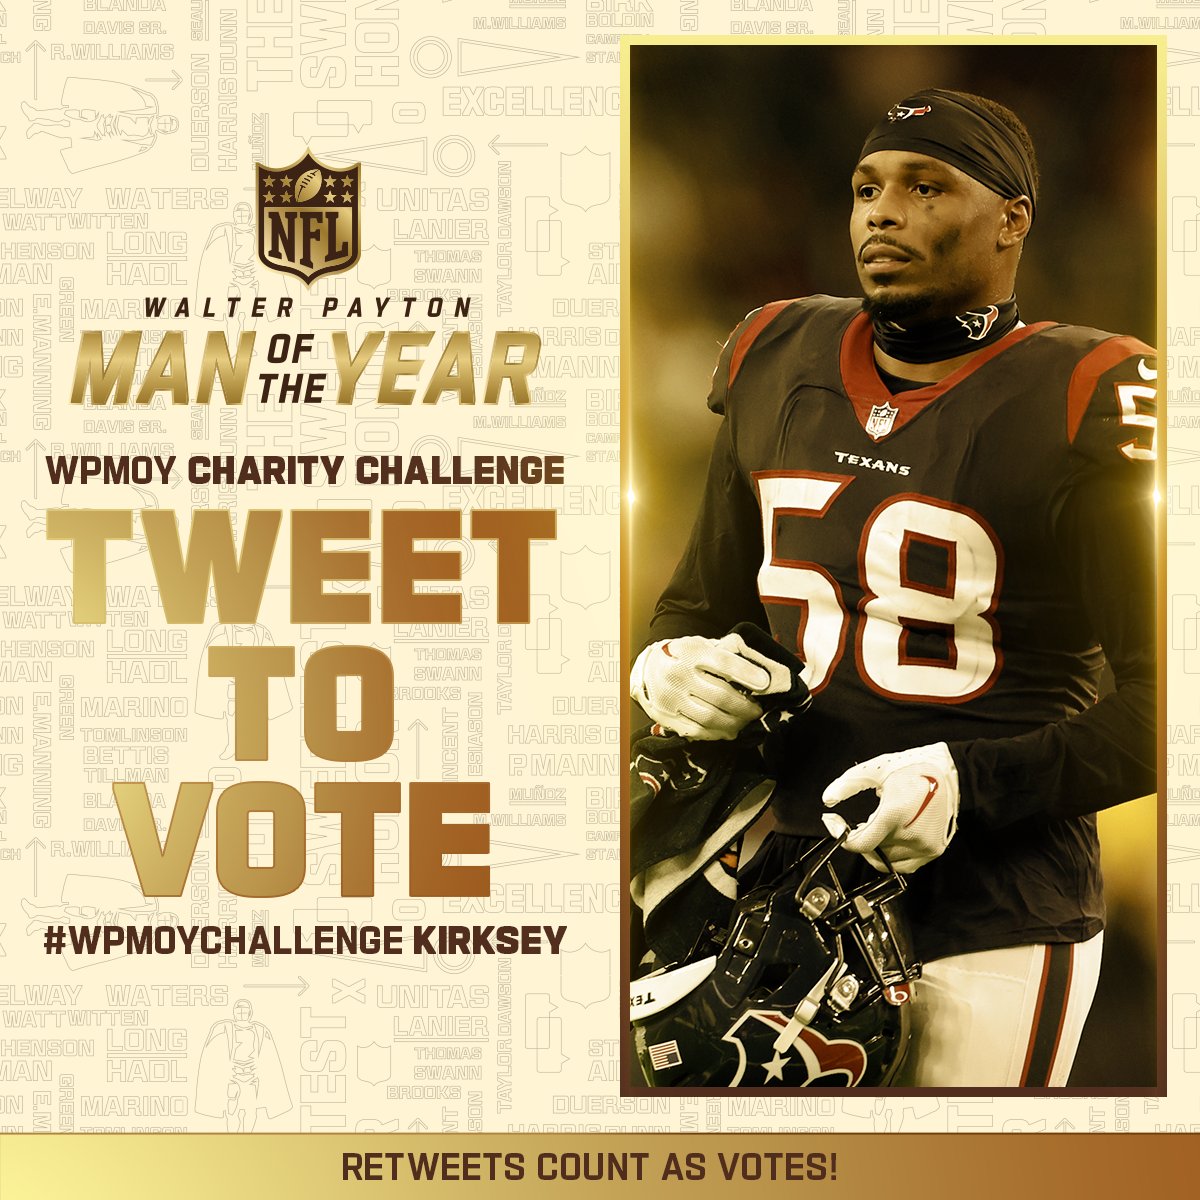 What’s up everyone, help support by retweeting! Much Love!#WPMOYChallenge Kirksey